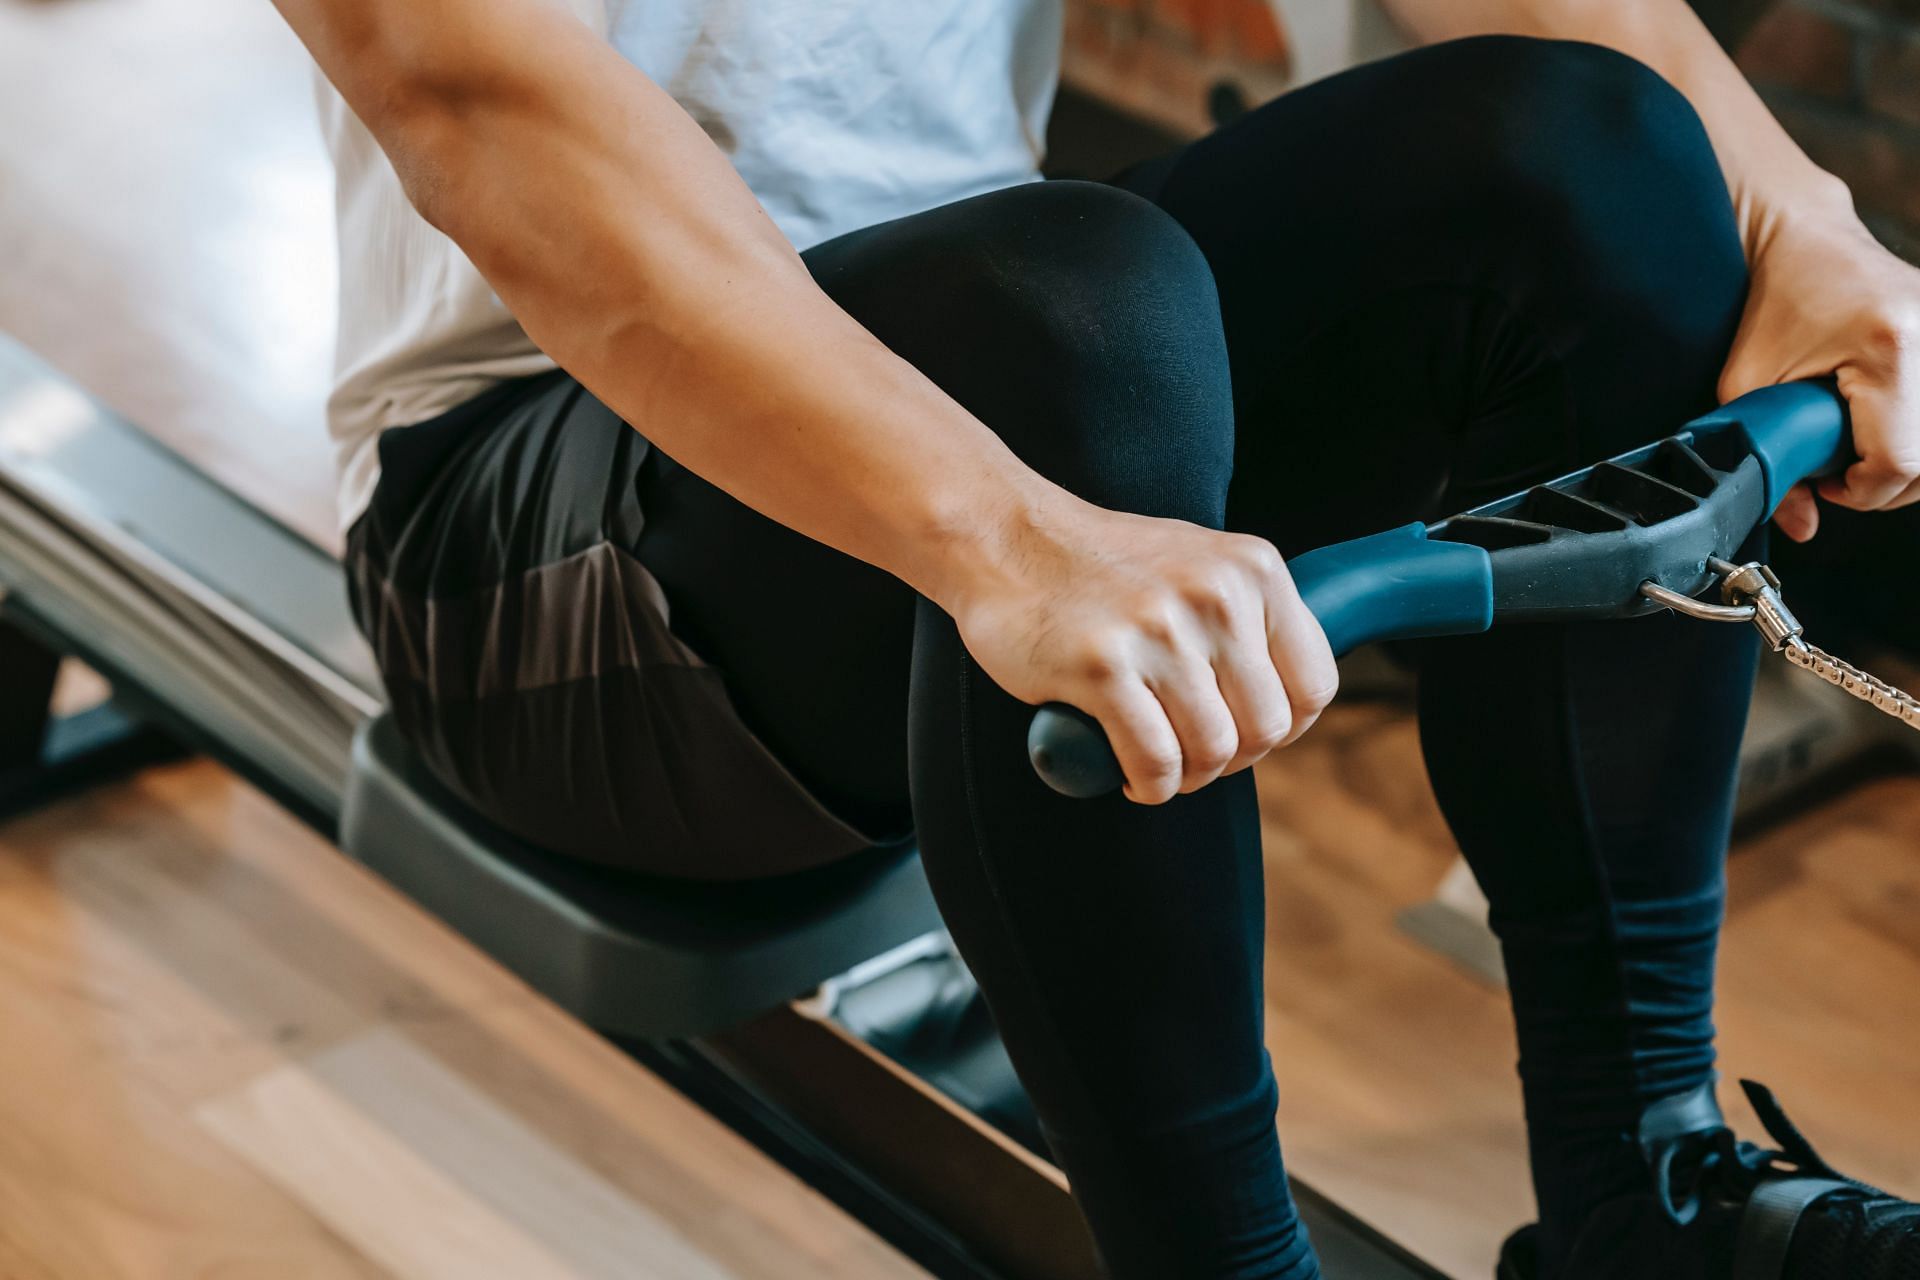 Rowing machine exercises can be a refreshing change to your routine (Image via Pexels @Andres Ayrton)